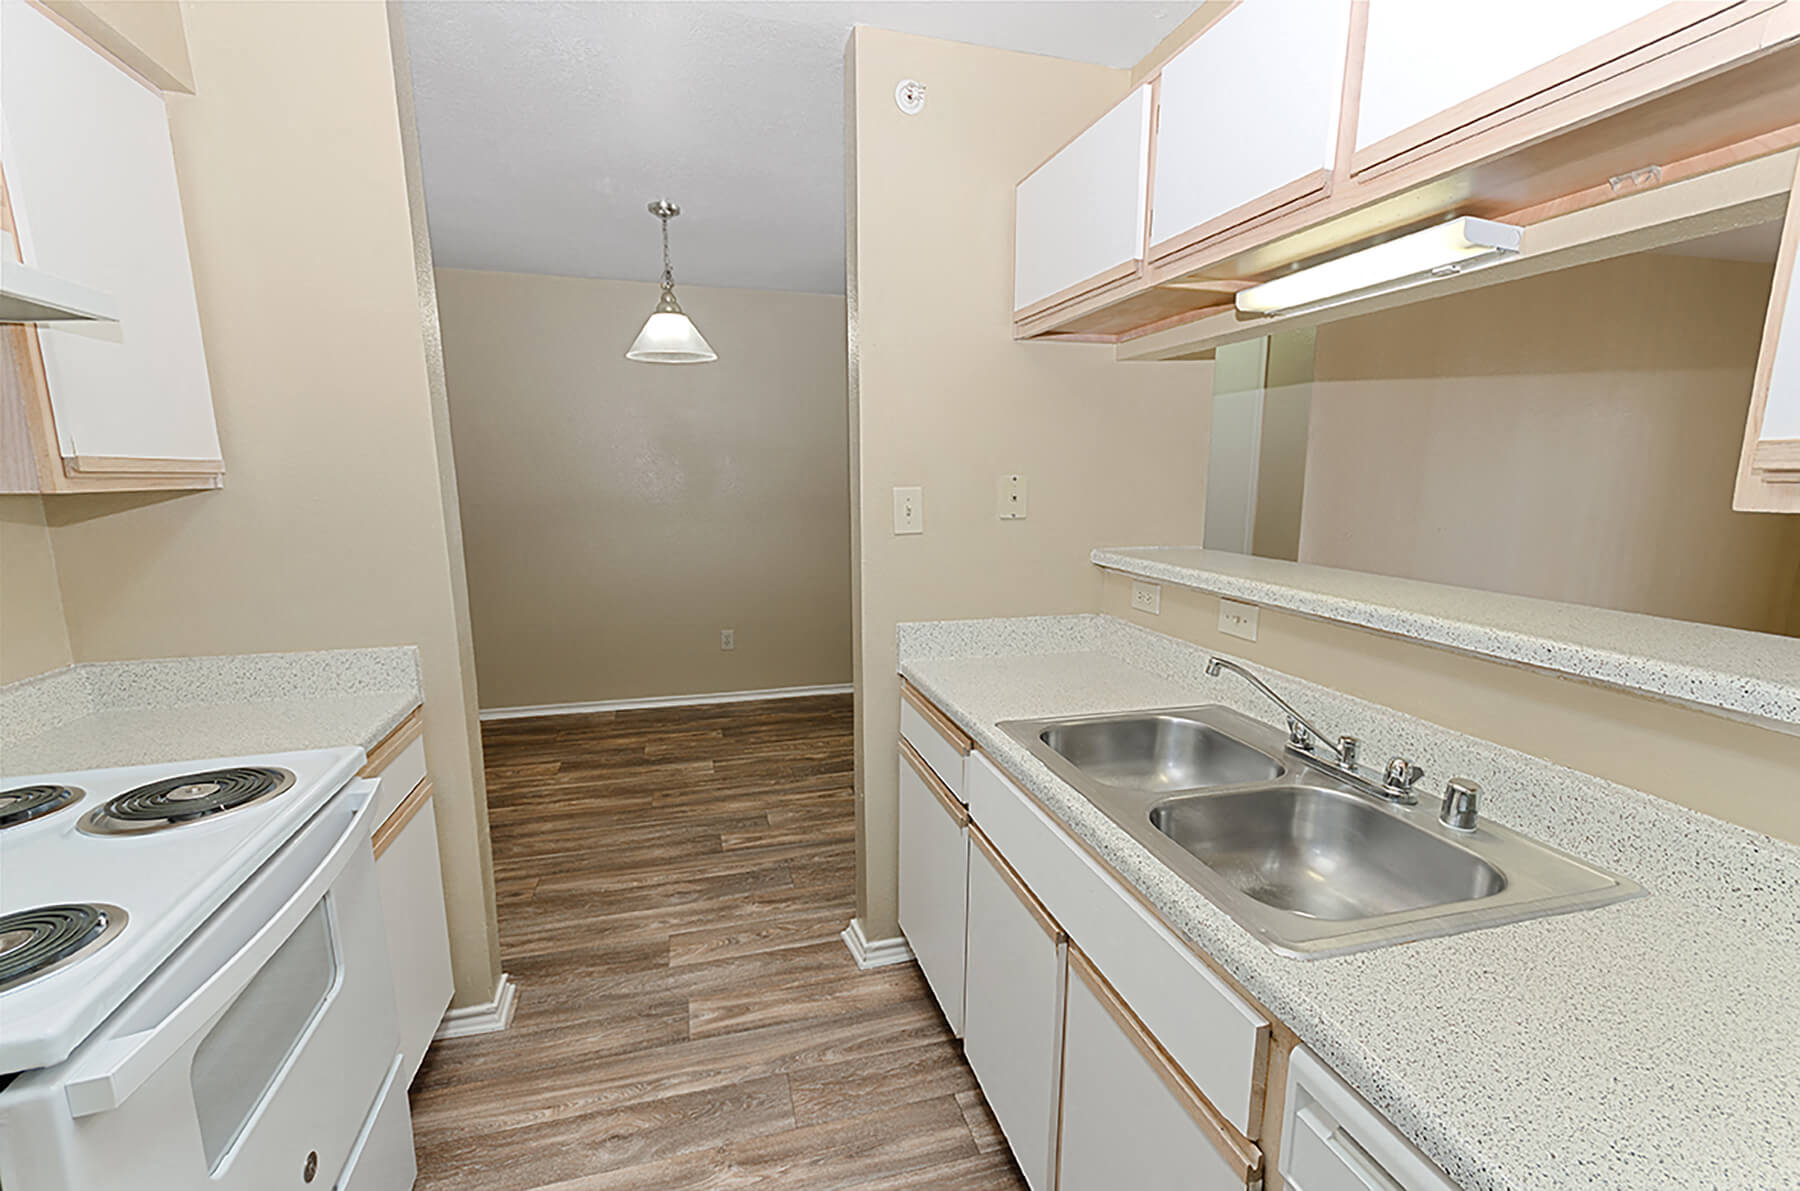 A light kitchen with hardwood floors at the Valley Trails Apartments in Irving, Texas.